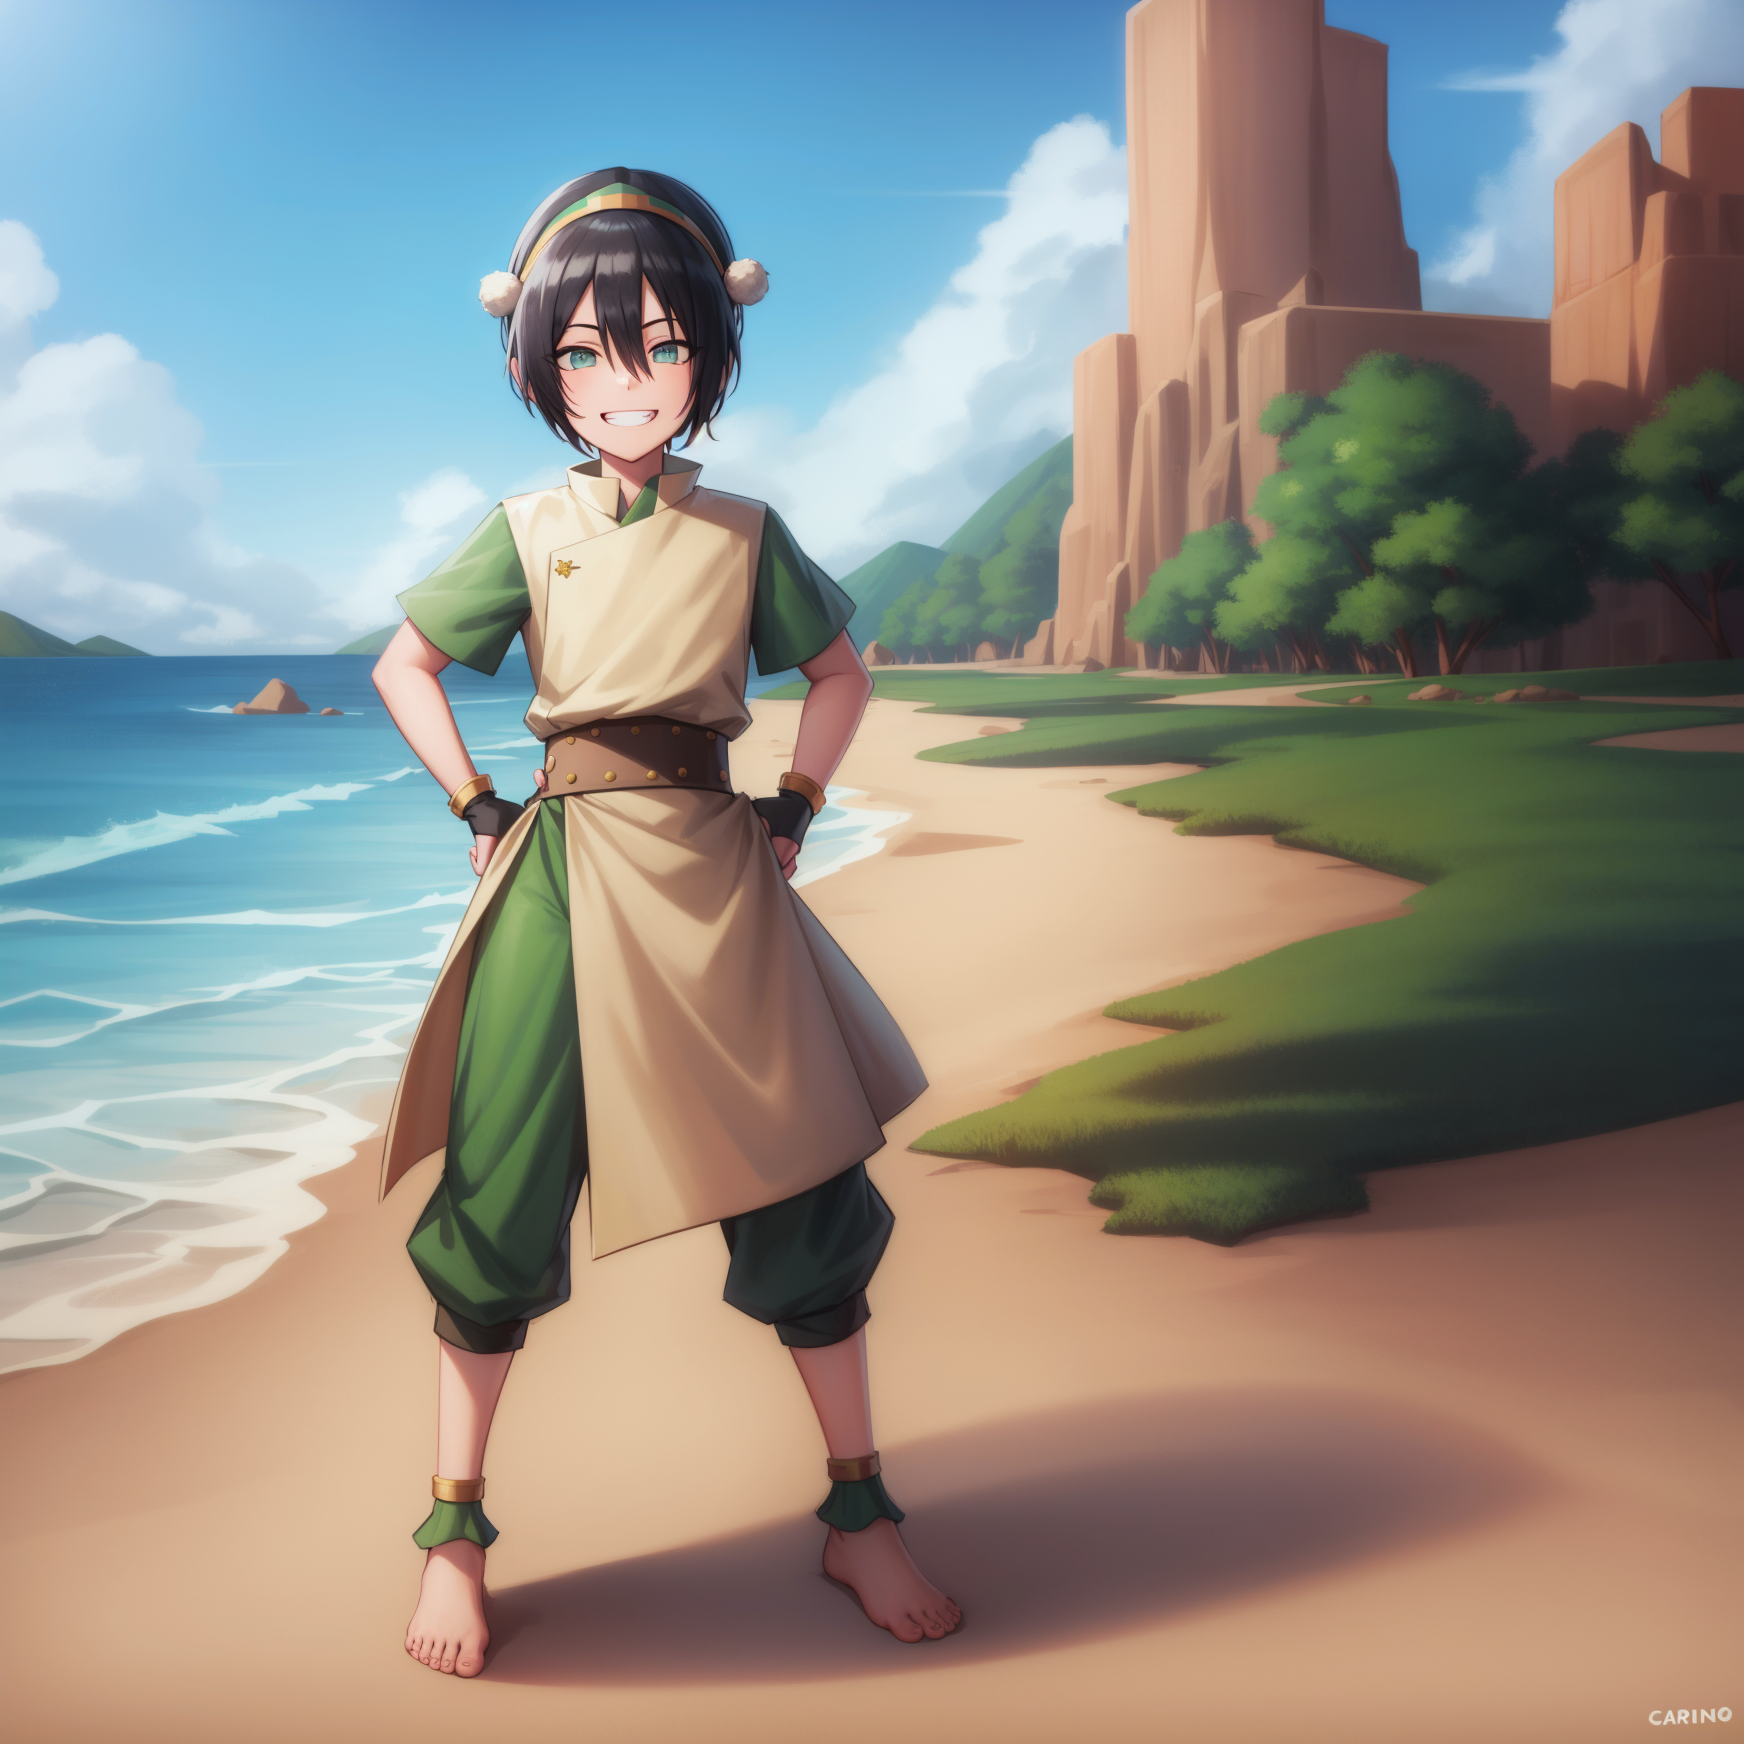 Avatar Toph image by Pleased_Chomusuke